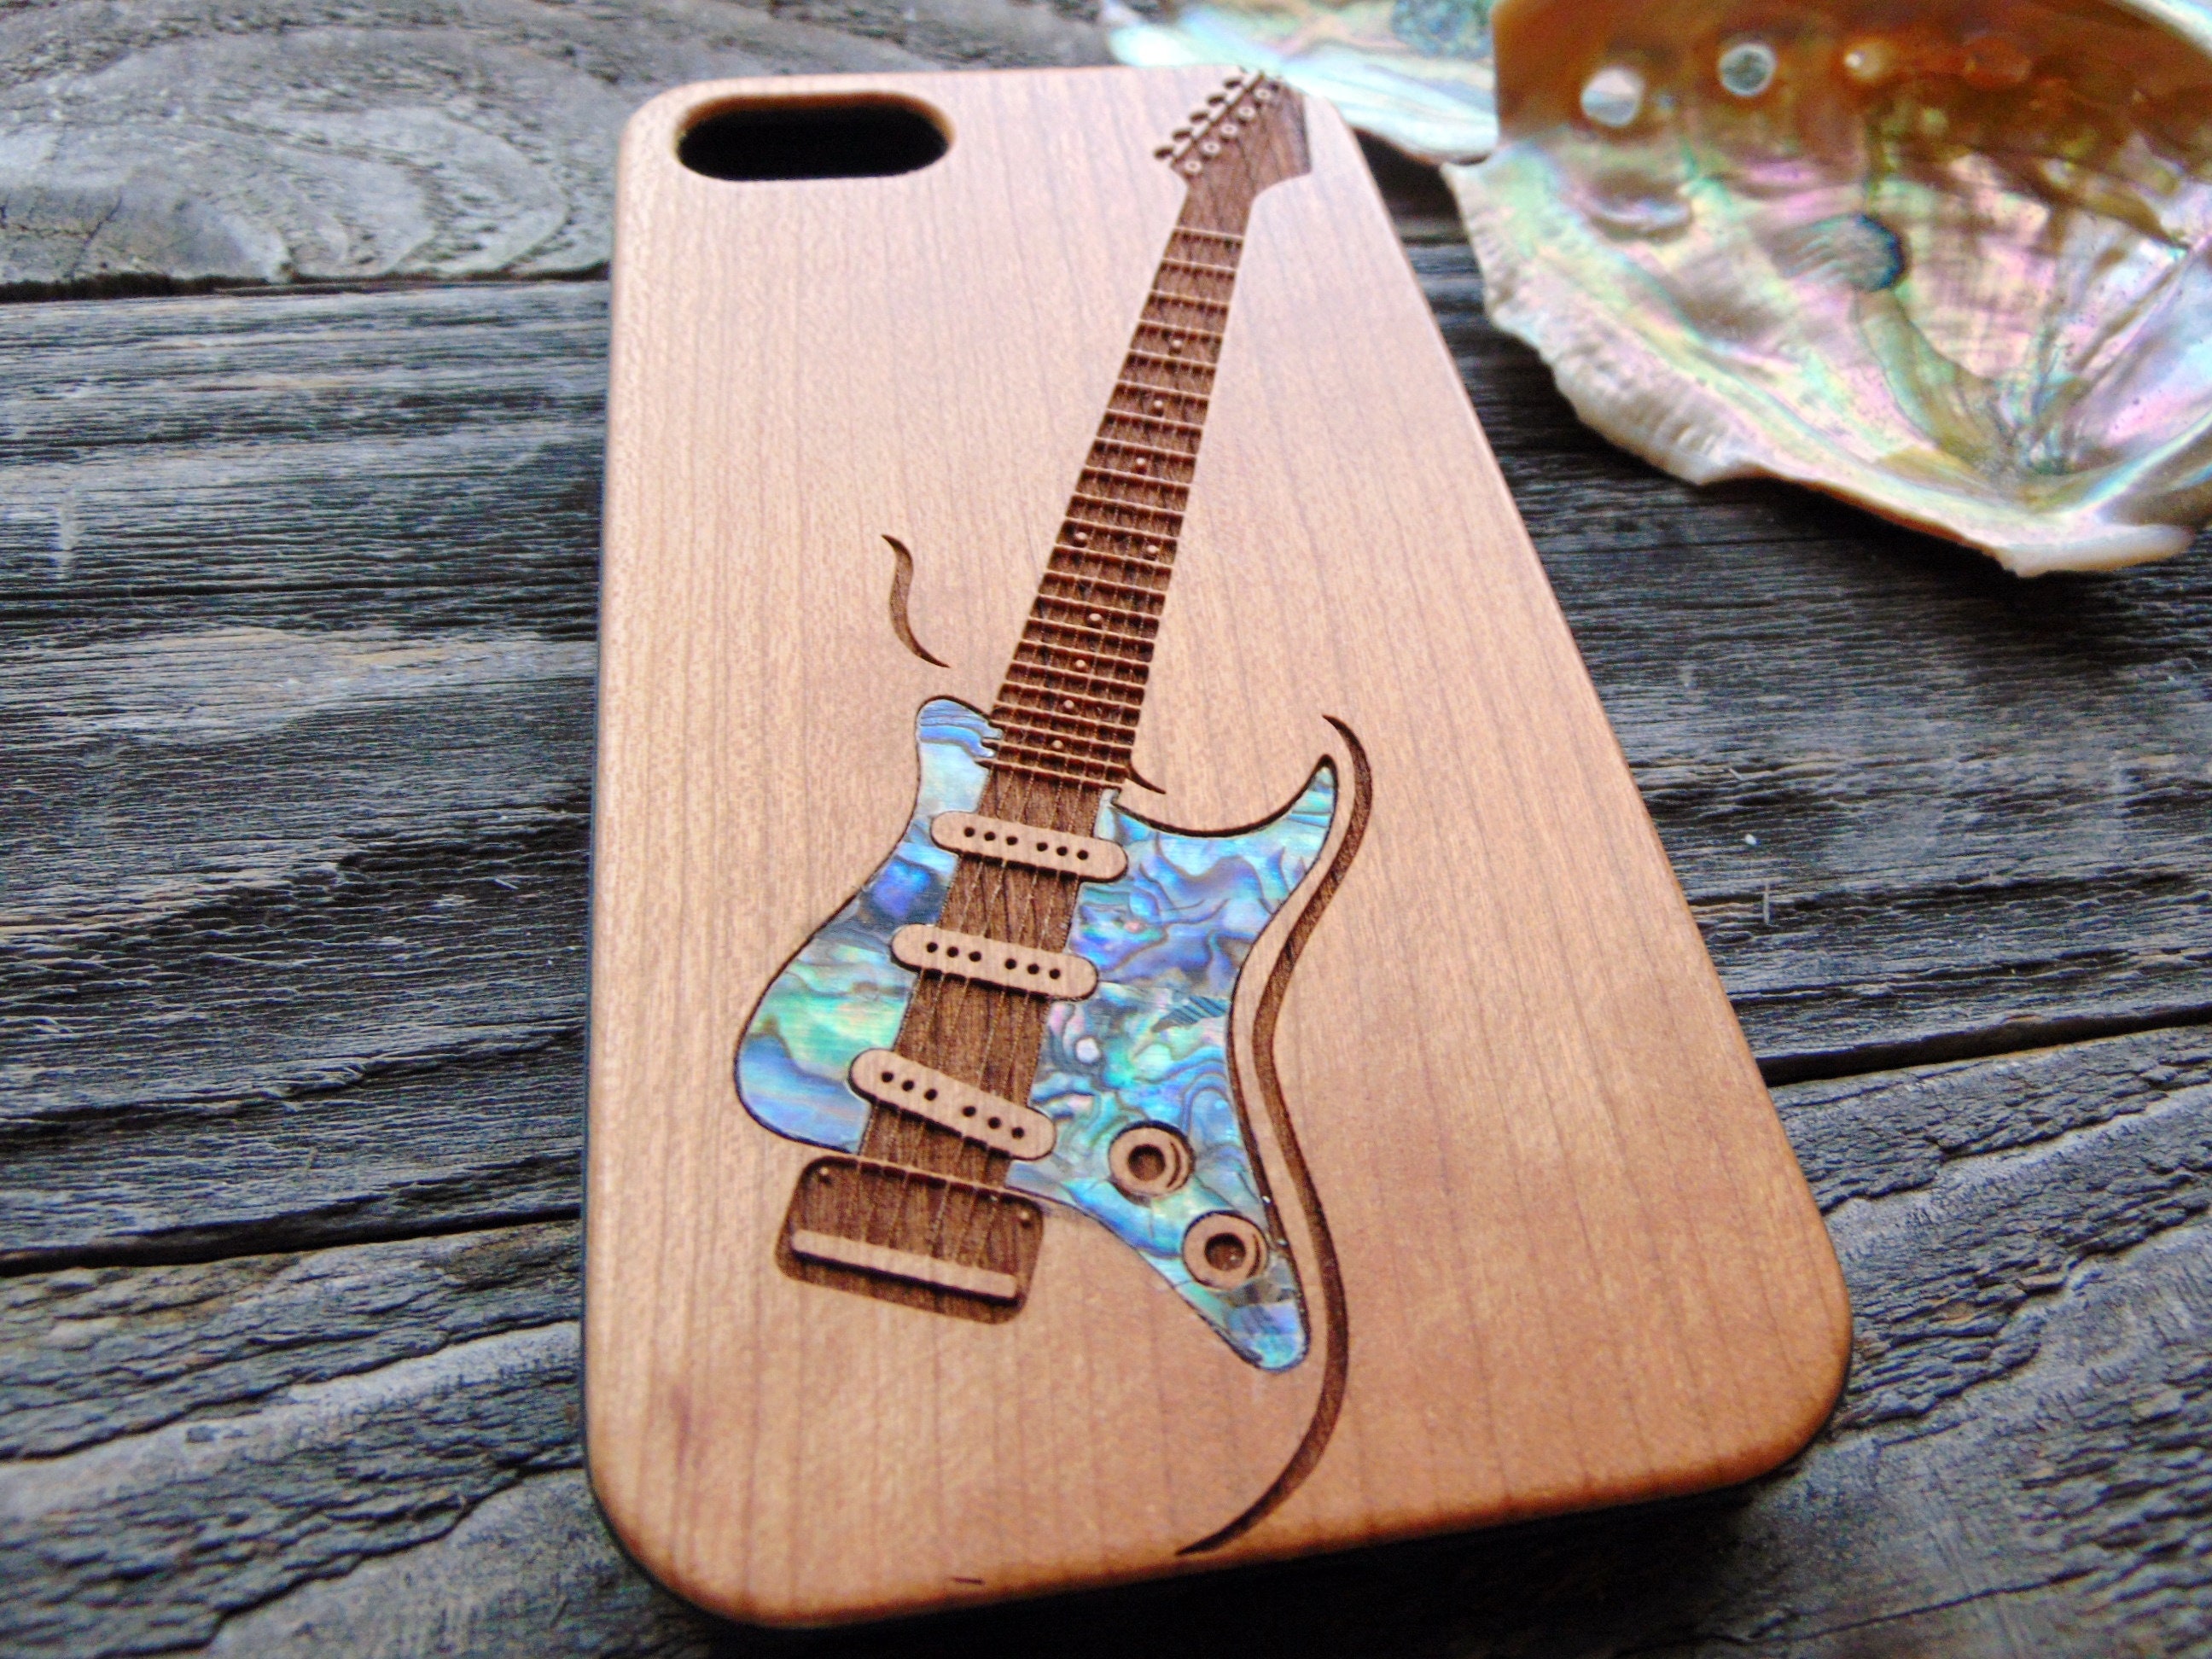 Guitar design iphone case, personalized gift for boyfriend, iphone 11